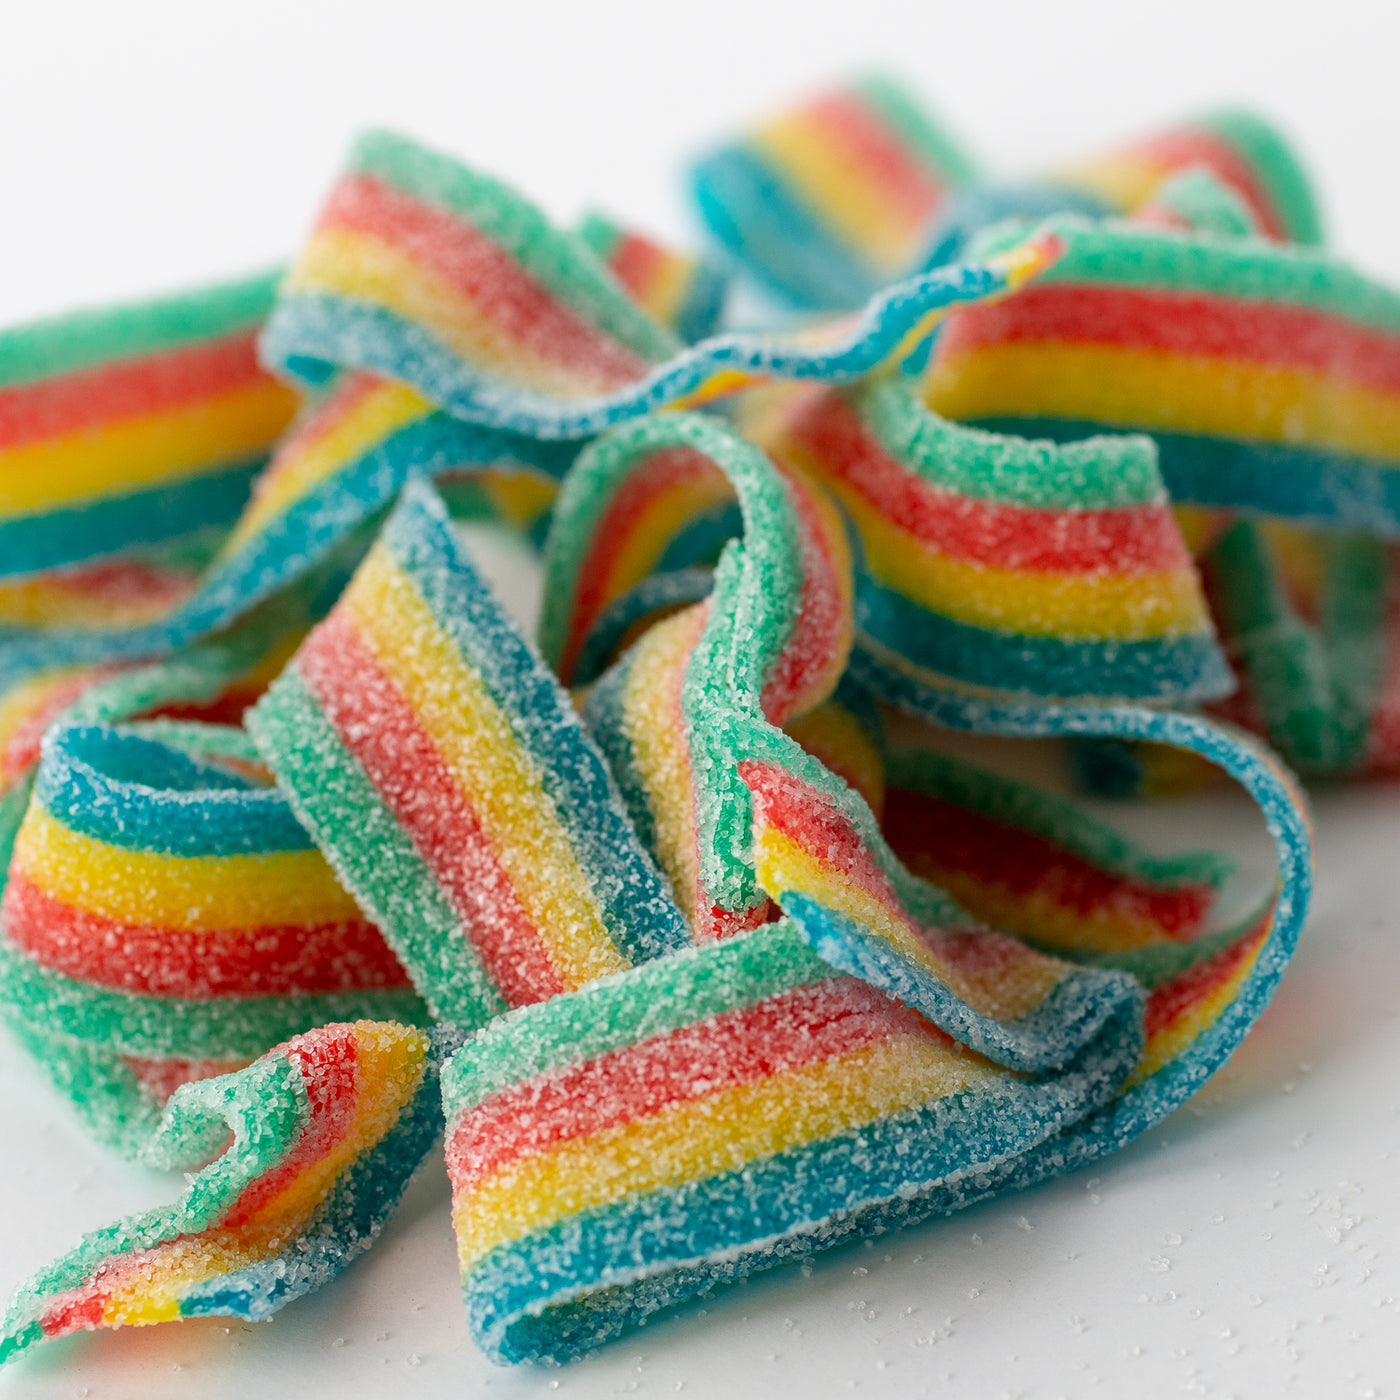 Sour Rainbow Licorice Belts Amy's Candy Bar Chicago